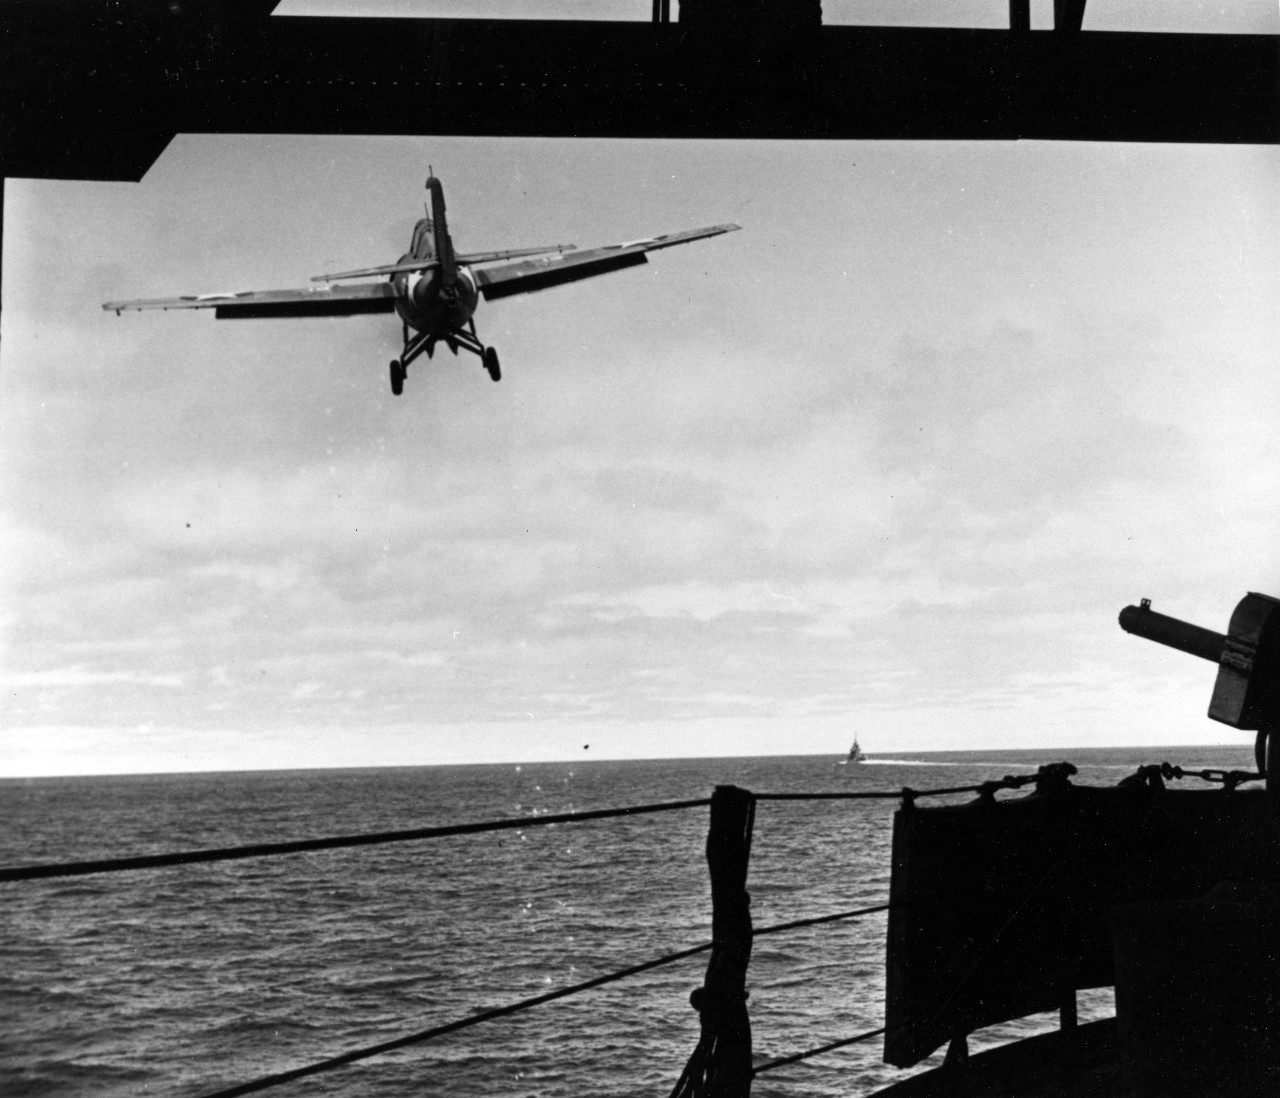 Photo #: 80-G-312016  Battle of Midway, June 1942